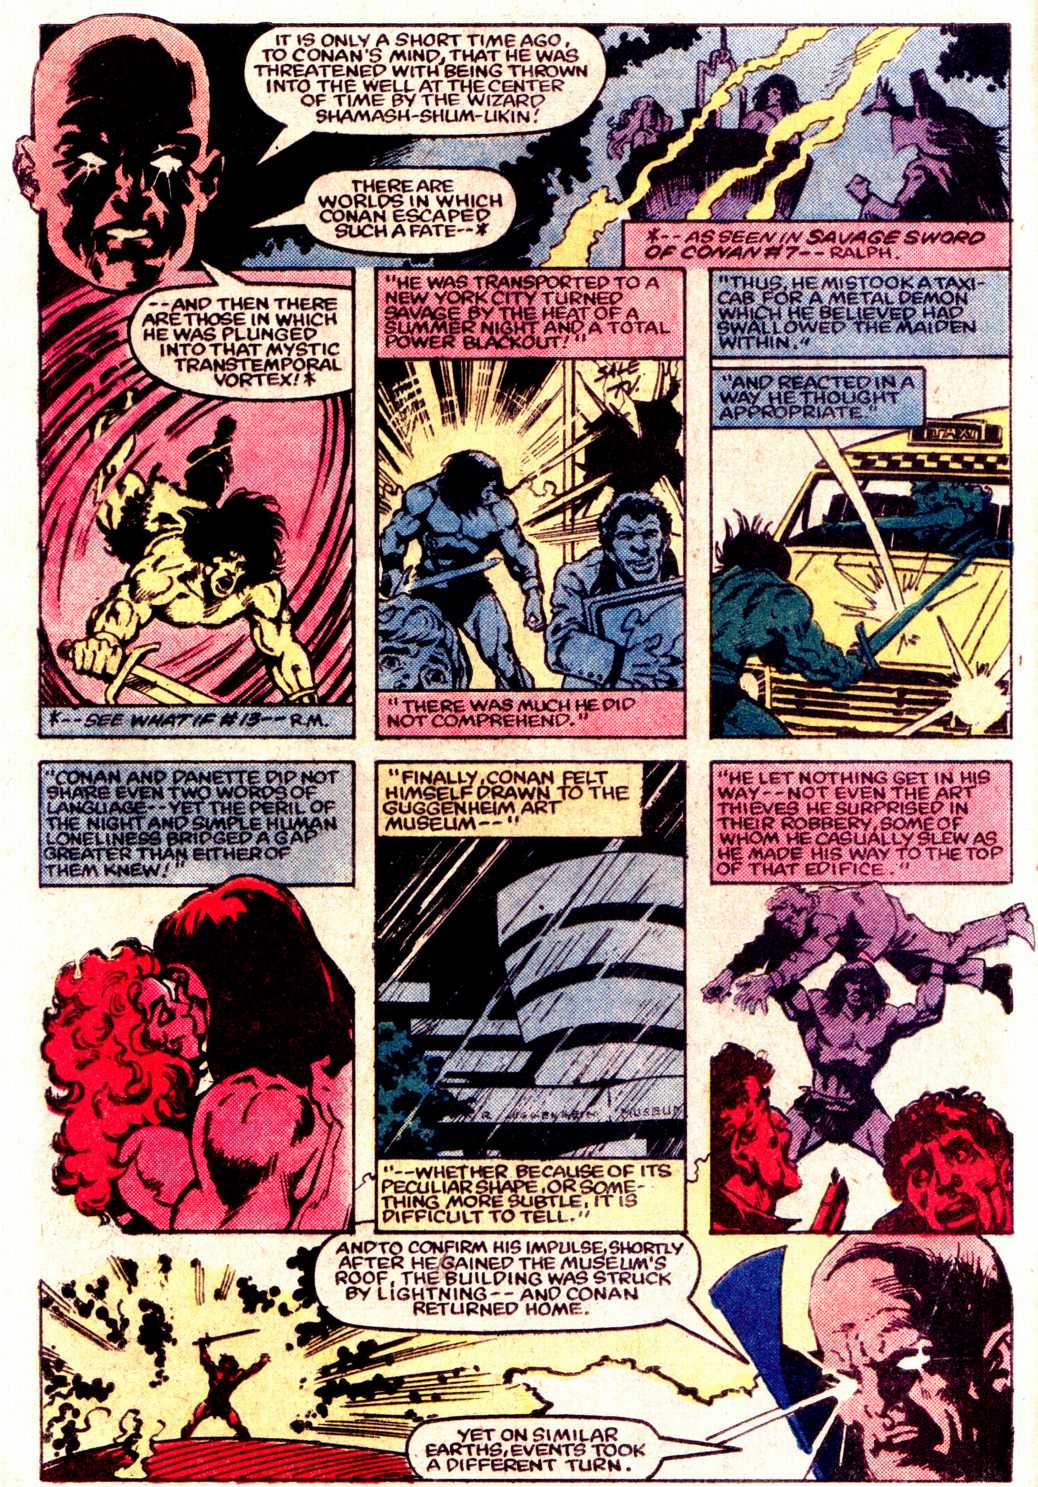 What If? (1977) issue 43 - Conan the Barbarian were stranded in the 20th century - Page 3